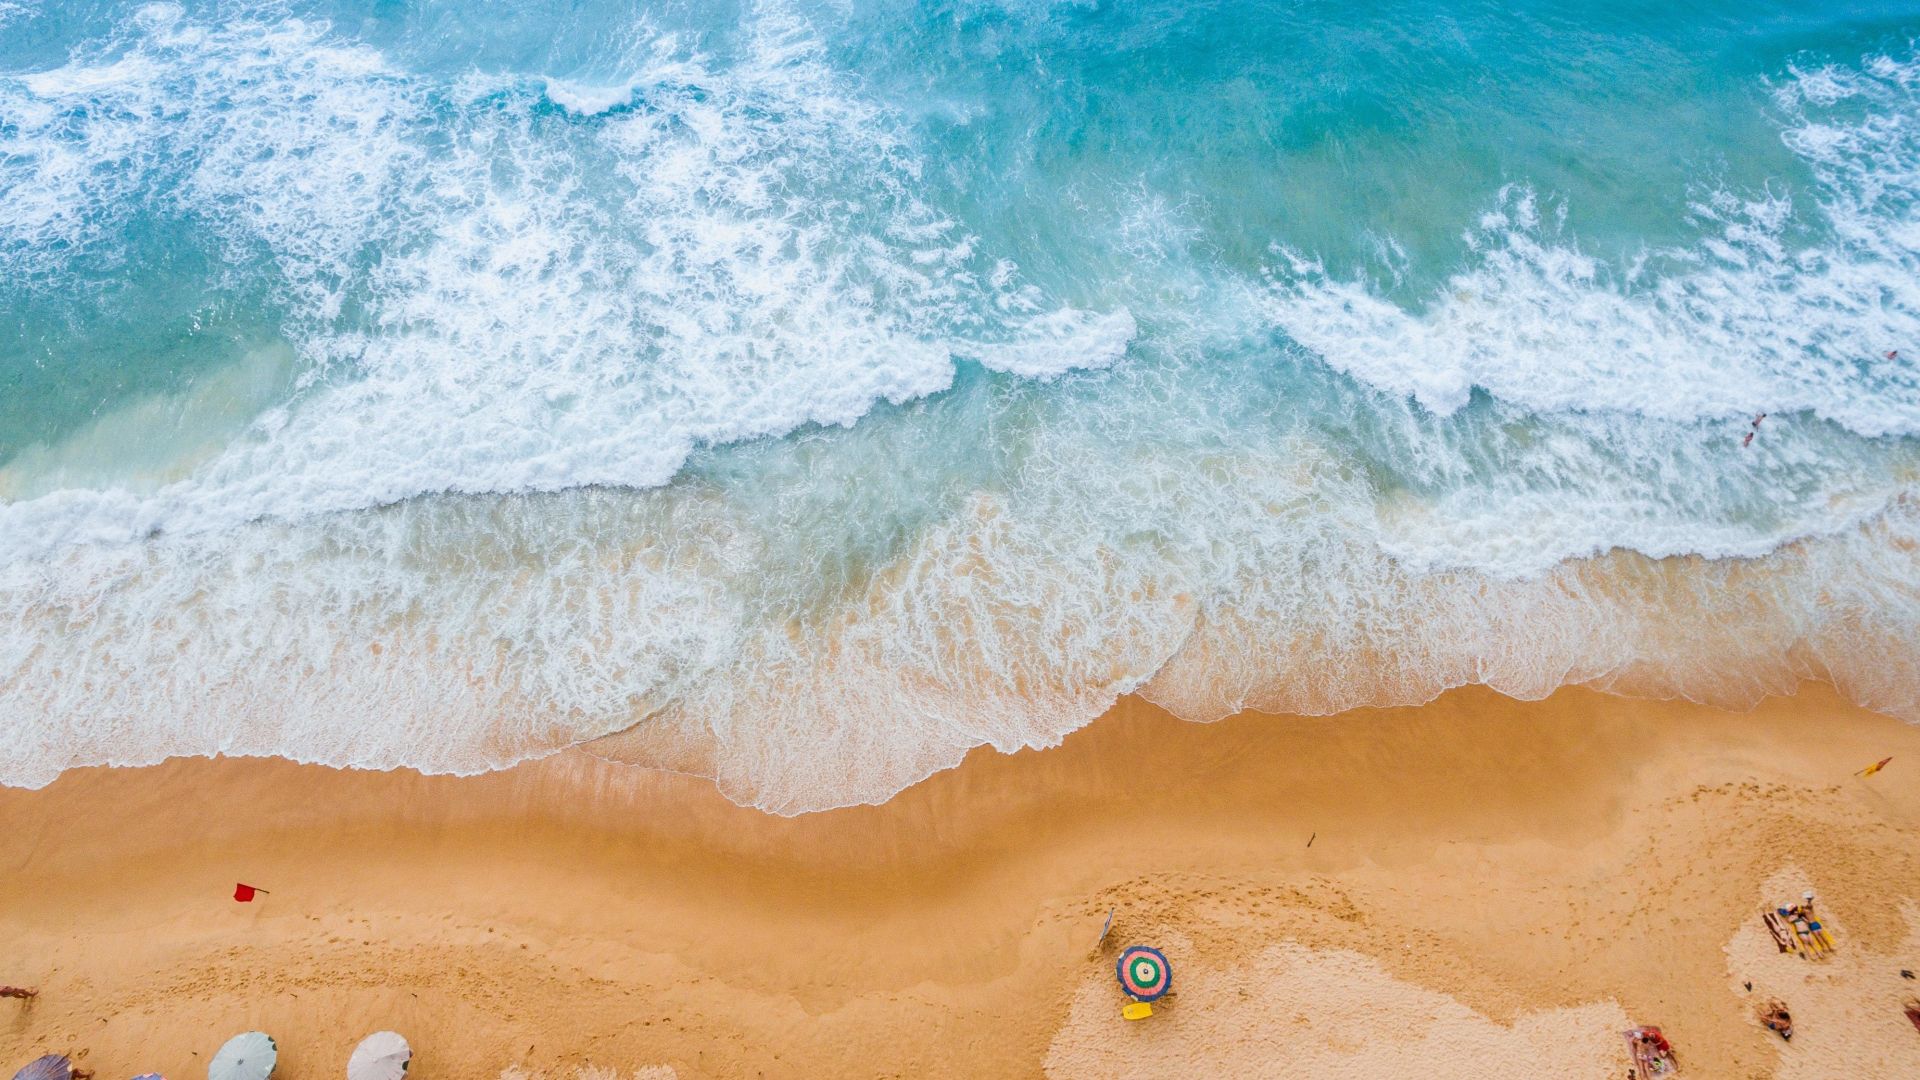 Desktop wallpaper aerial view, beach, sea waves, blue and white, HD image, picture, background, e0d279